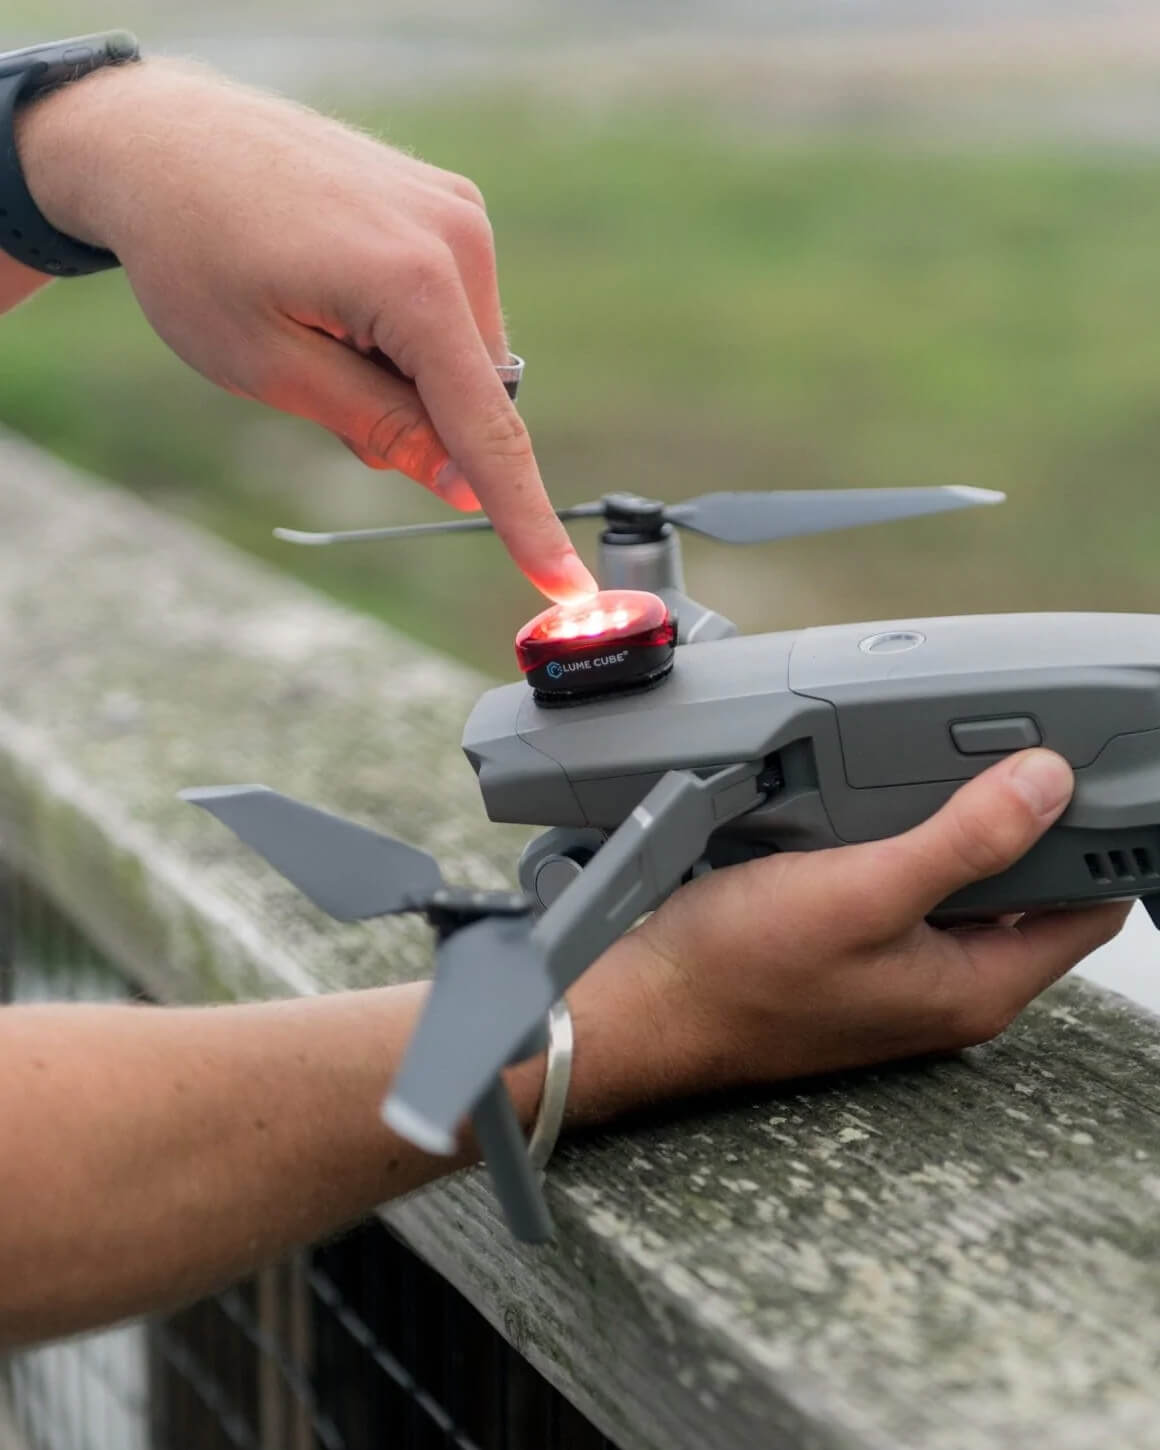 Finger pressing on red plastic Lume Cube Strobe Anti-Collision Lighting for Drones mounted atop gray drone.